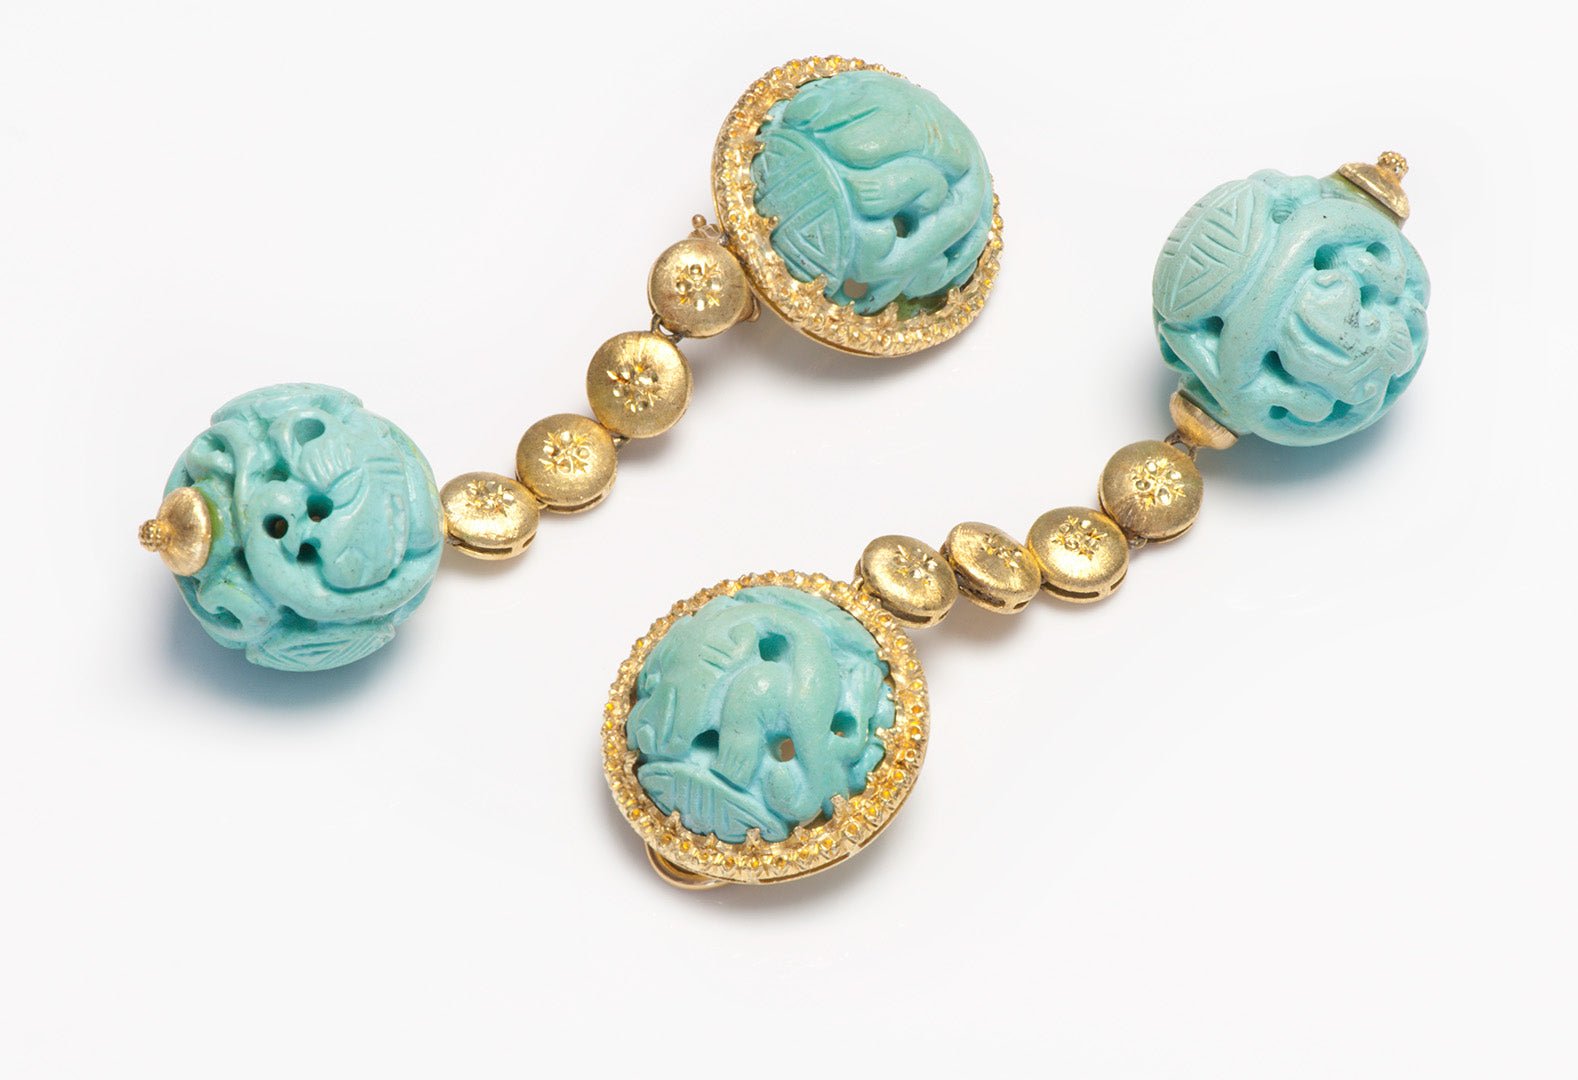 Buccellati 18K Gold Carved Turquoise Earrings